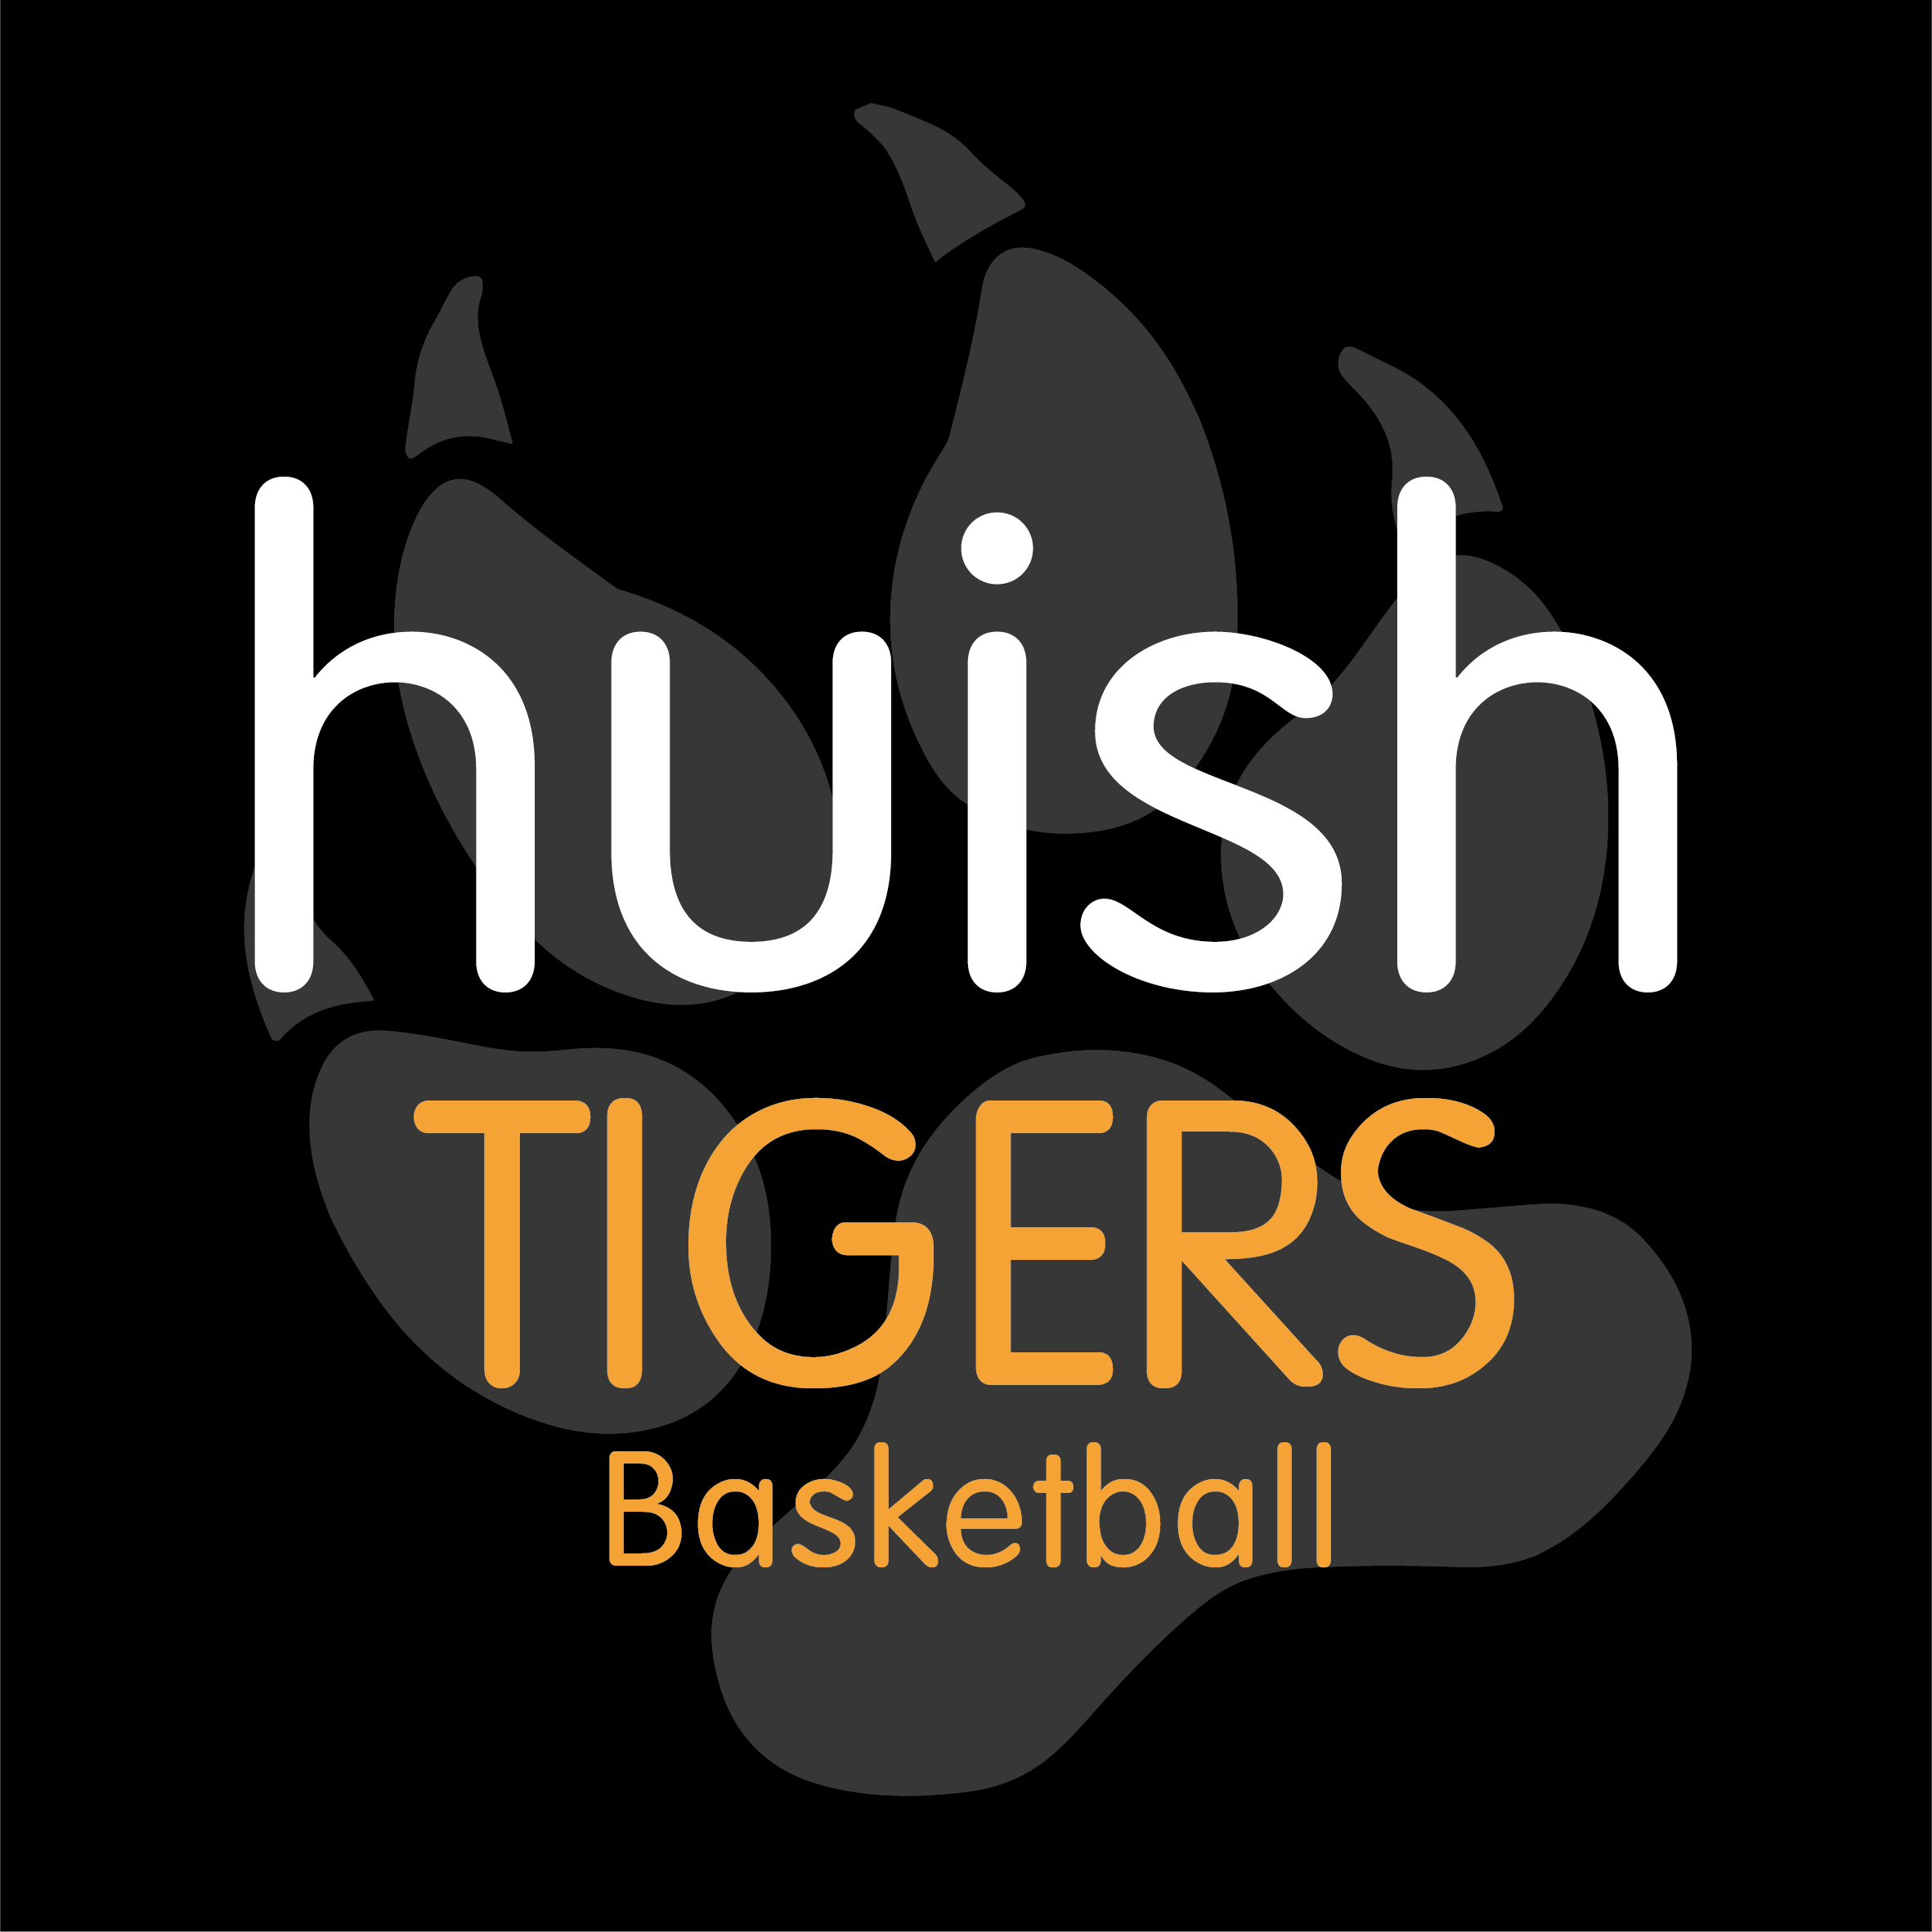 Tigers Cubs Aged 9-12 Term 5 - Full Term